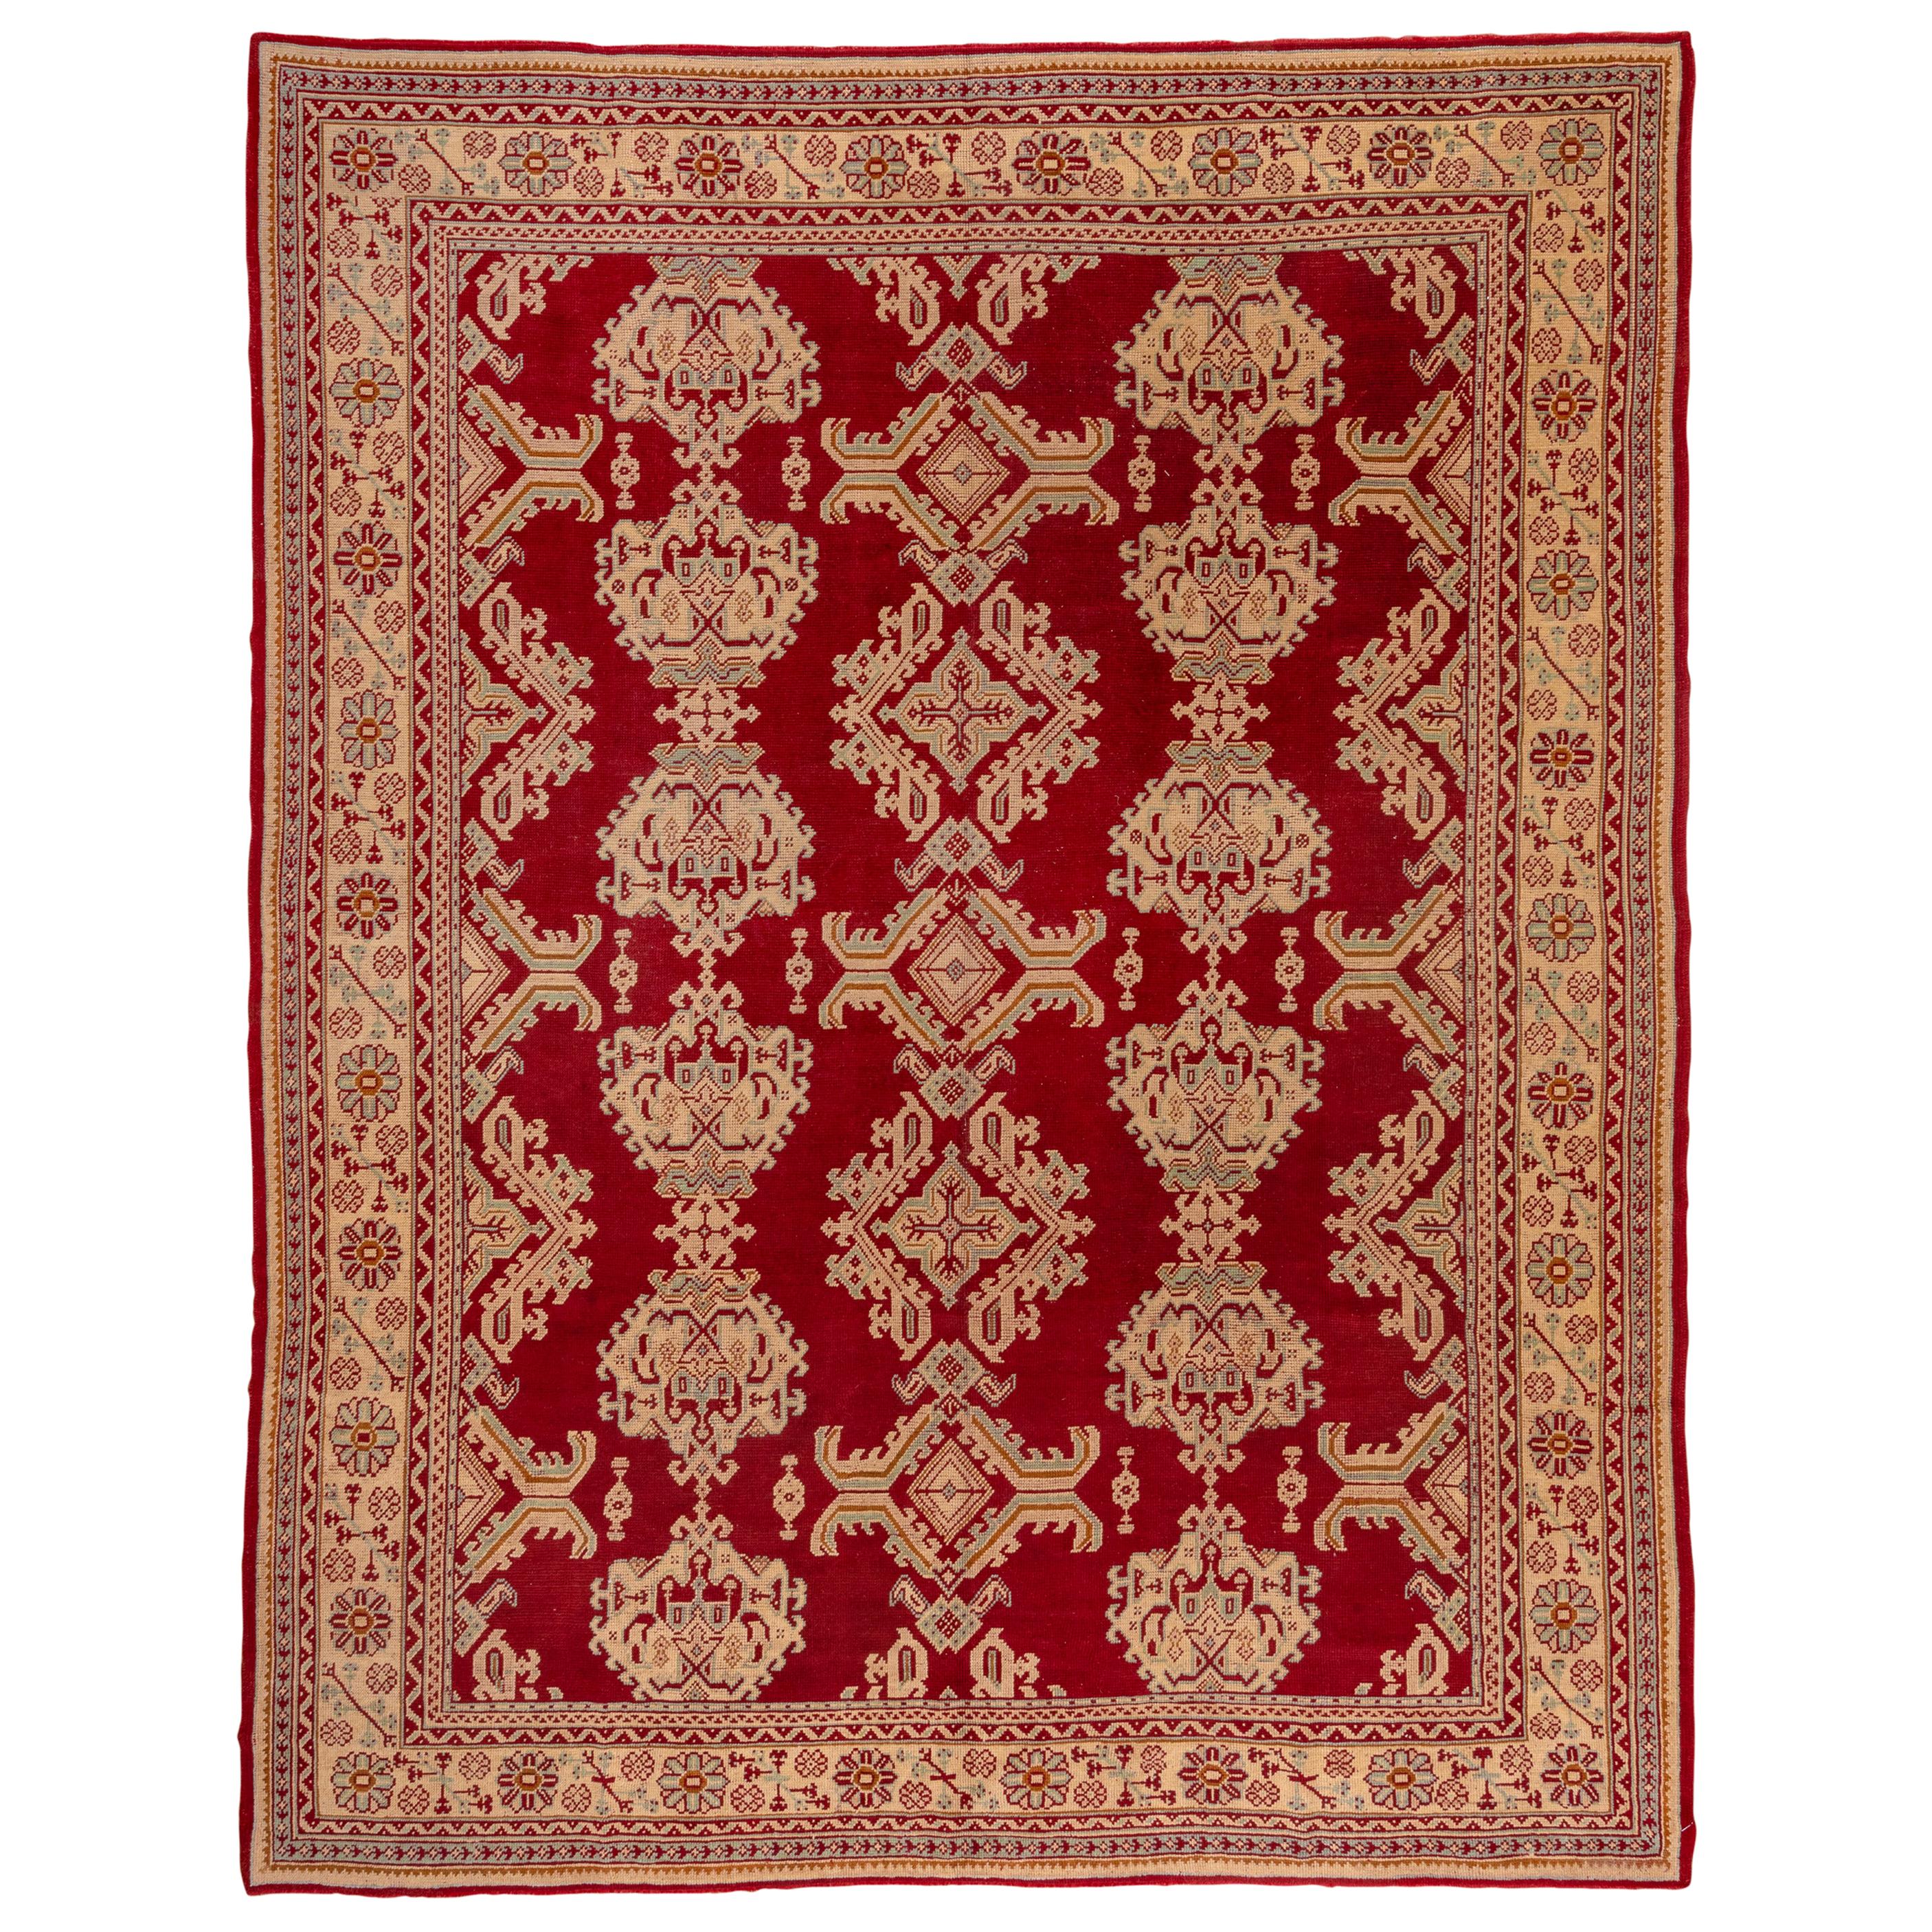 Antique Red Oushak Rug, Gold Borders, All-Over Field with Leaf Pattern